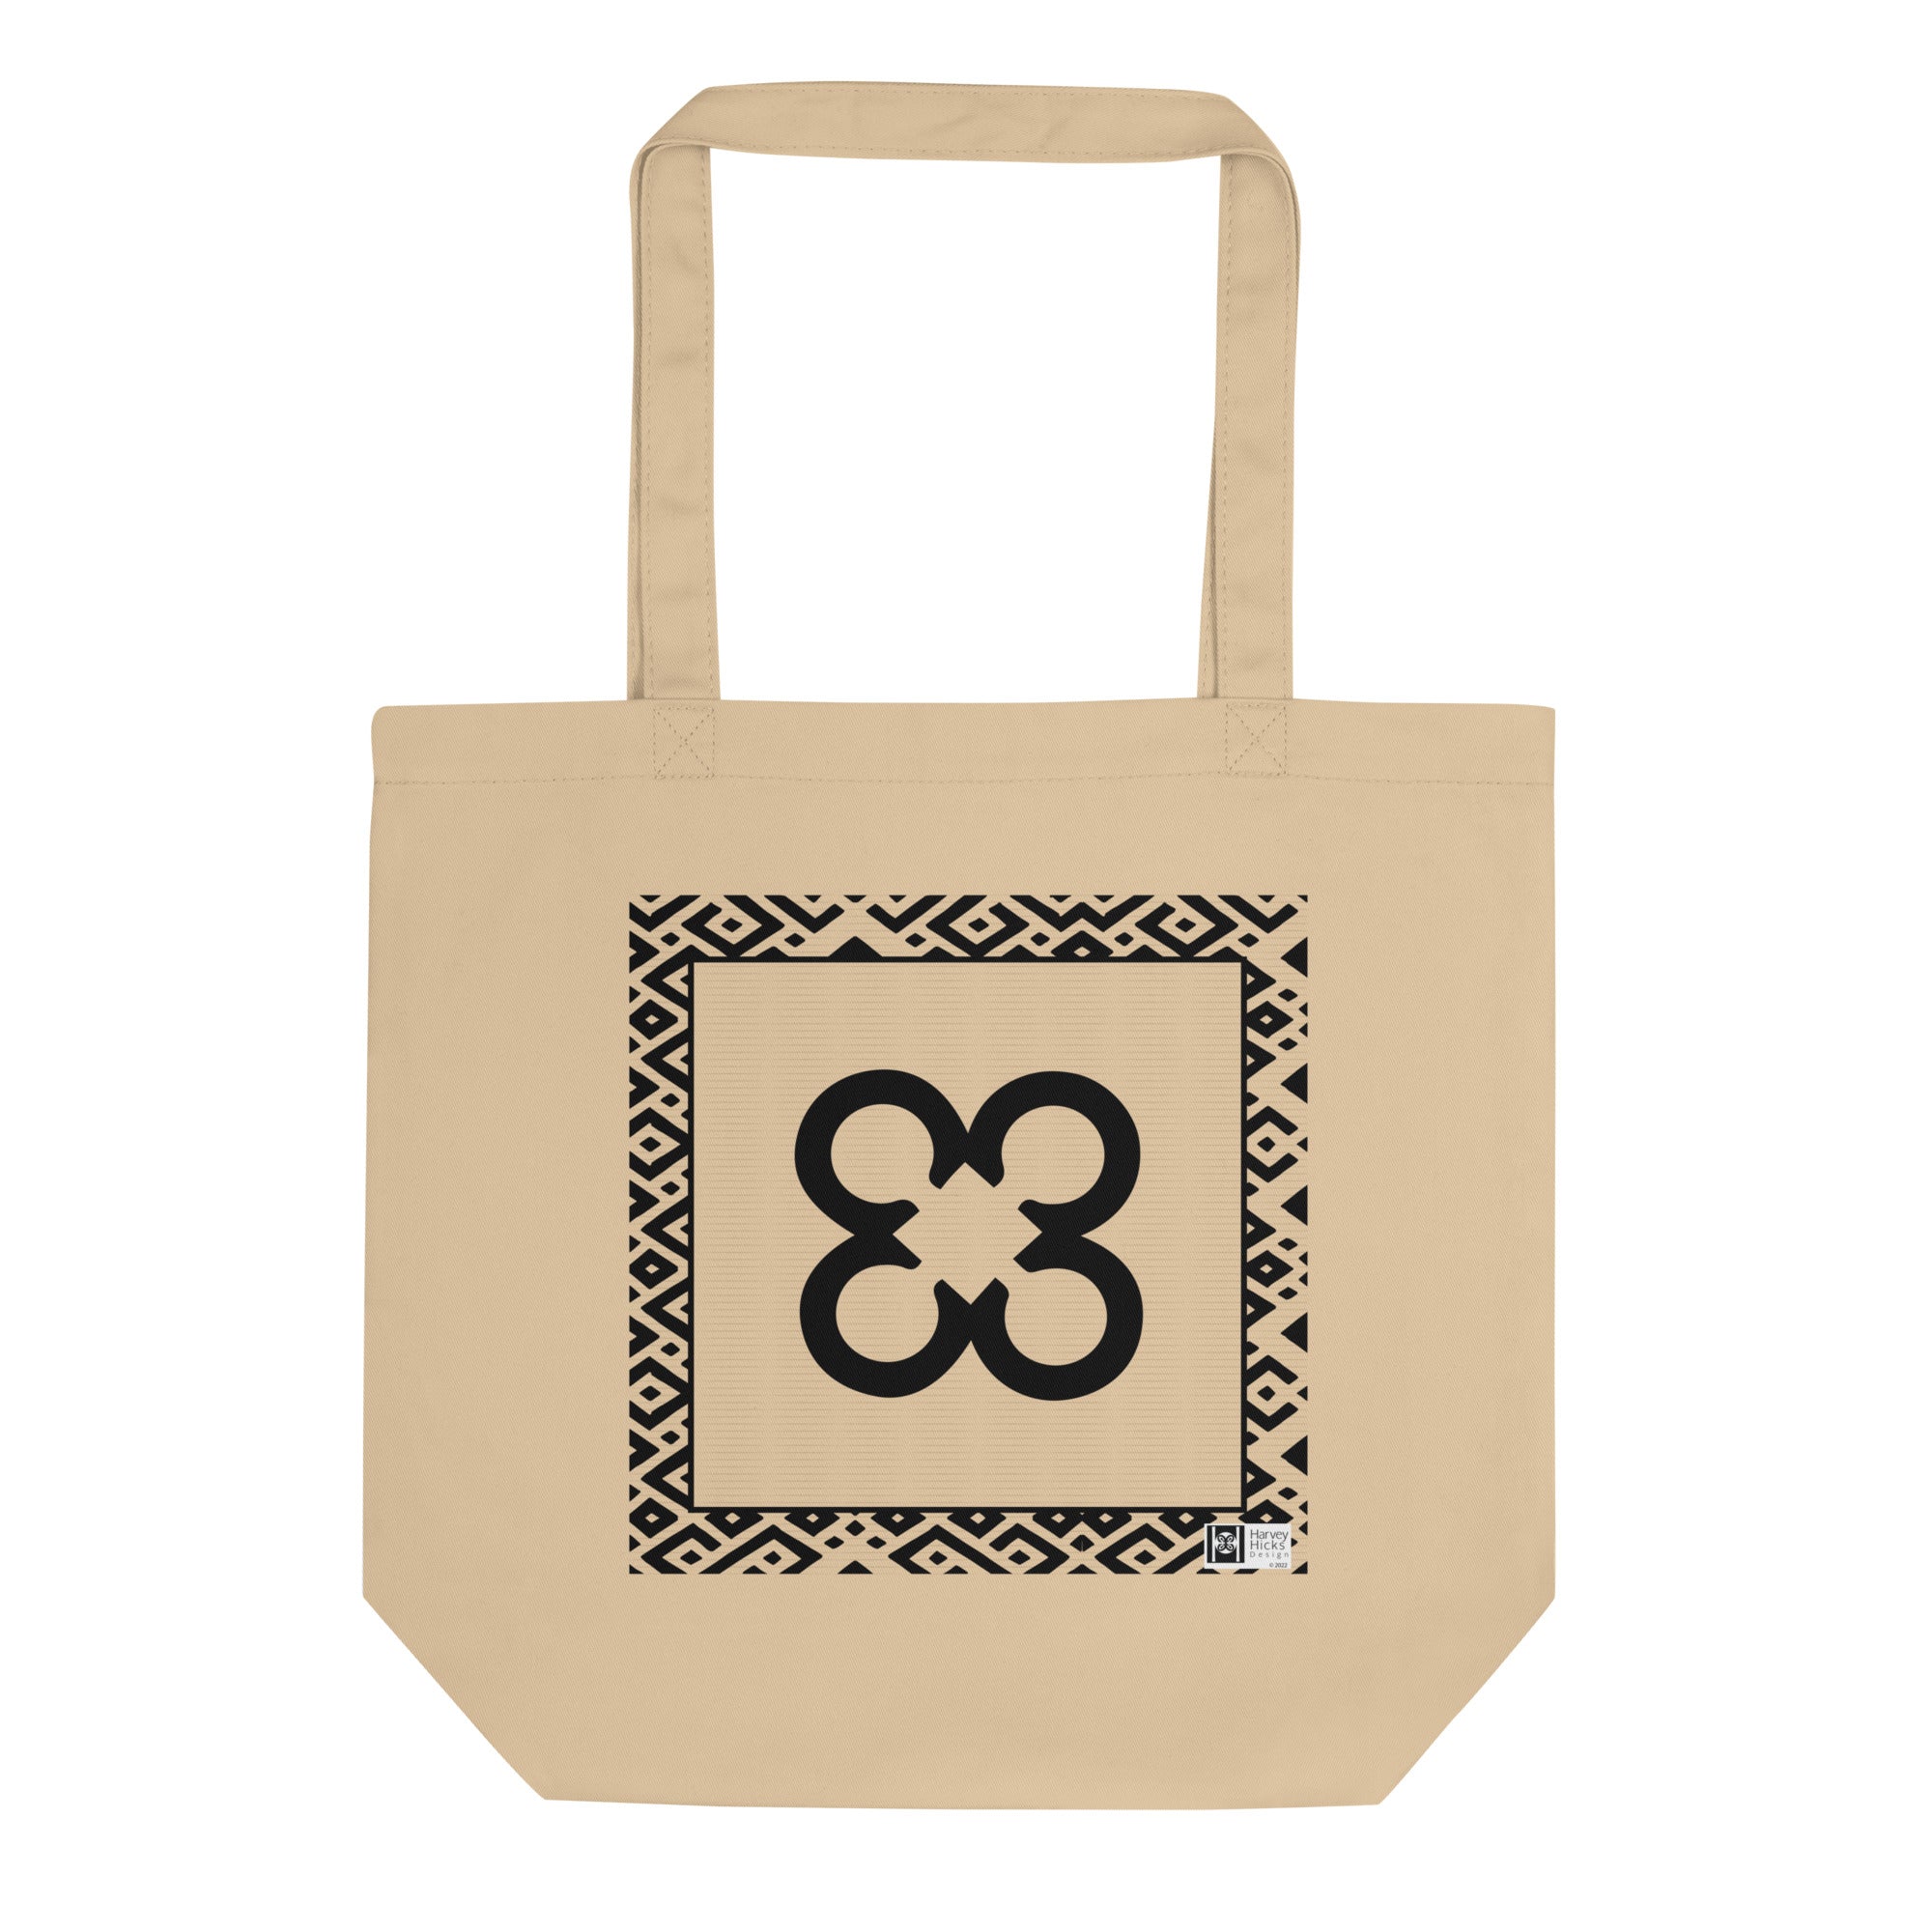 100% cotton Eco Tote Bag, featuring the Adinkra symbol for dutifulness, NO TEXT